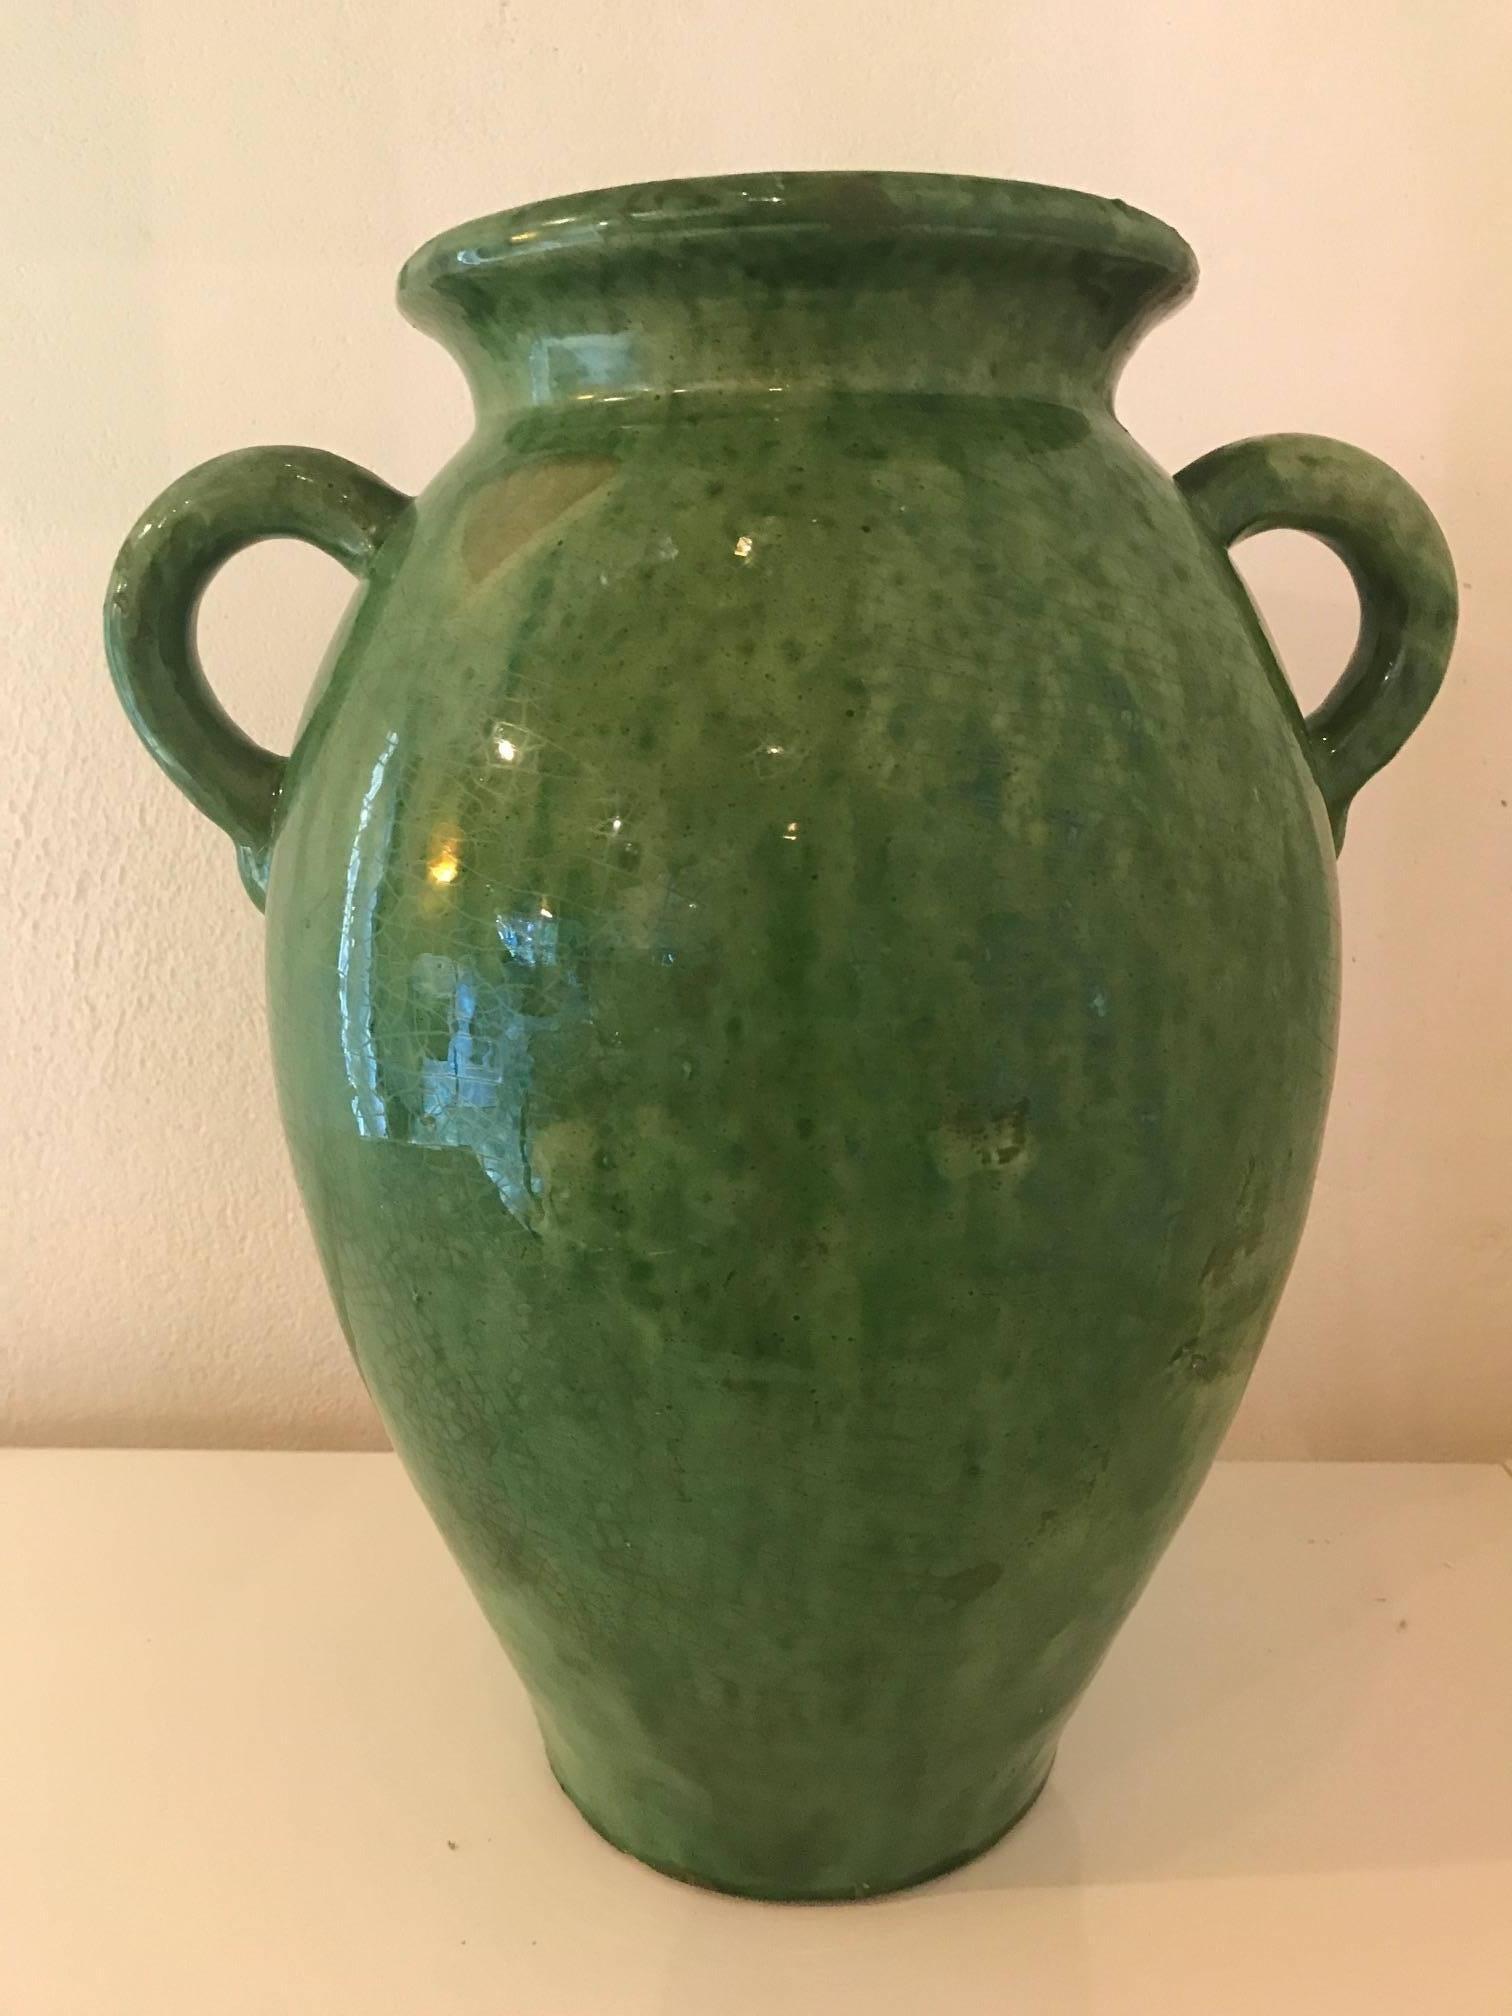 A beautiful tall green glazed ceramic vase or jug made by the French Biot Company.